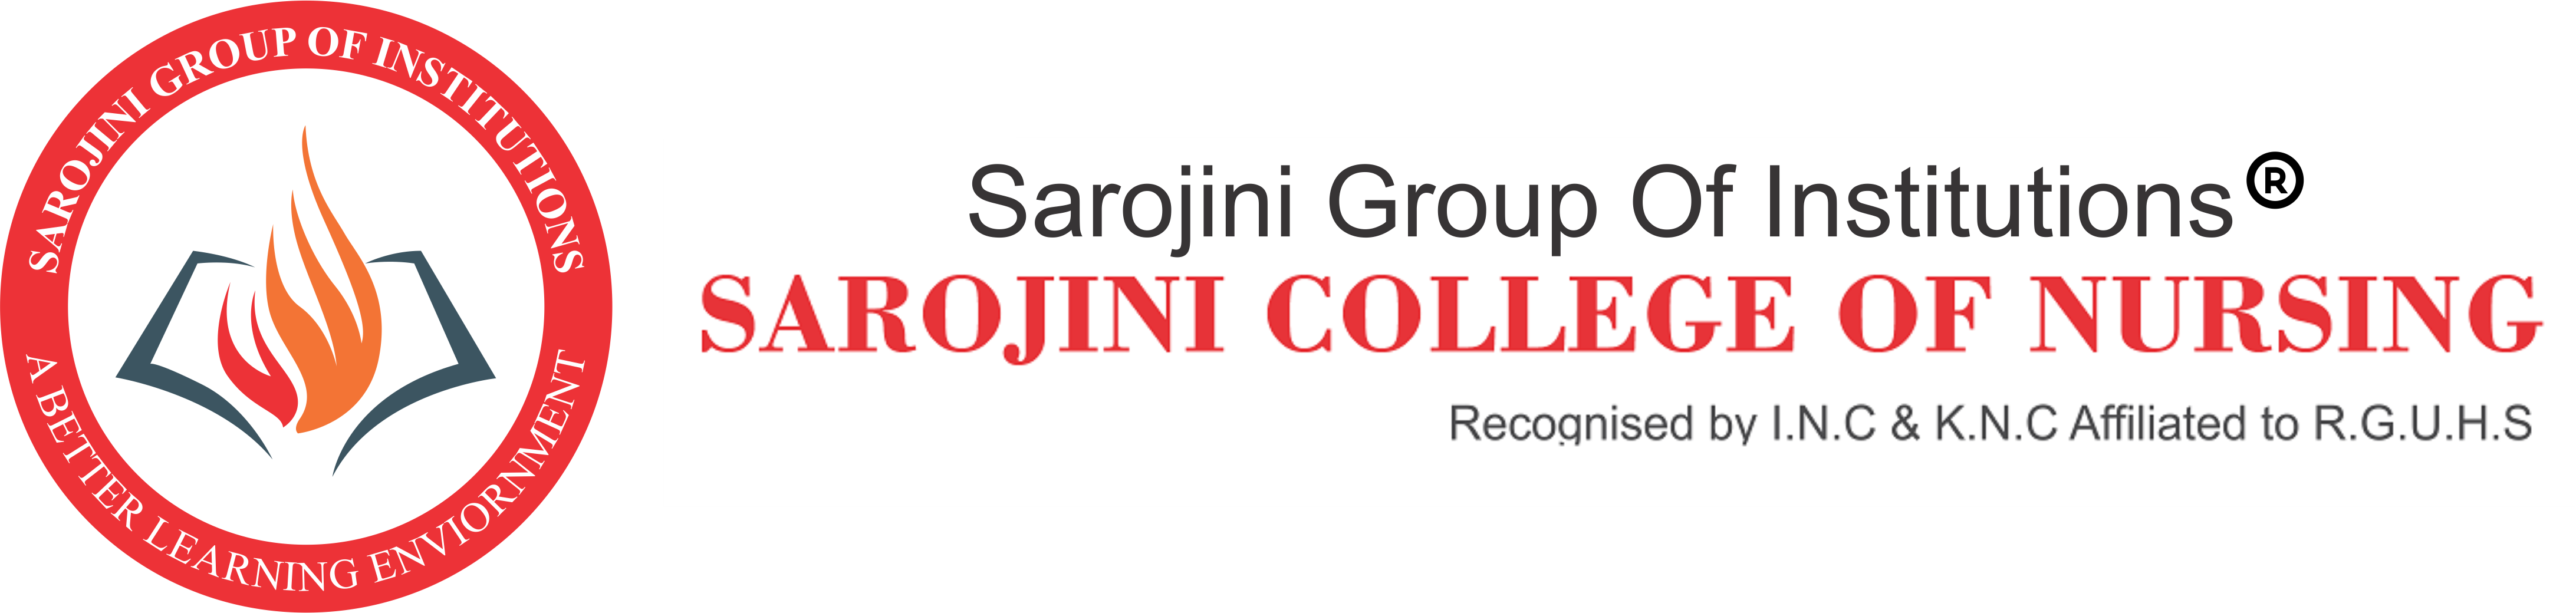 Sarojini Group of Institutions